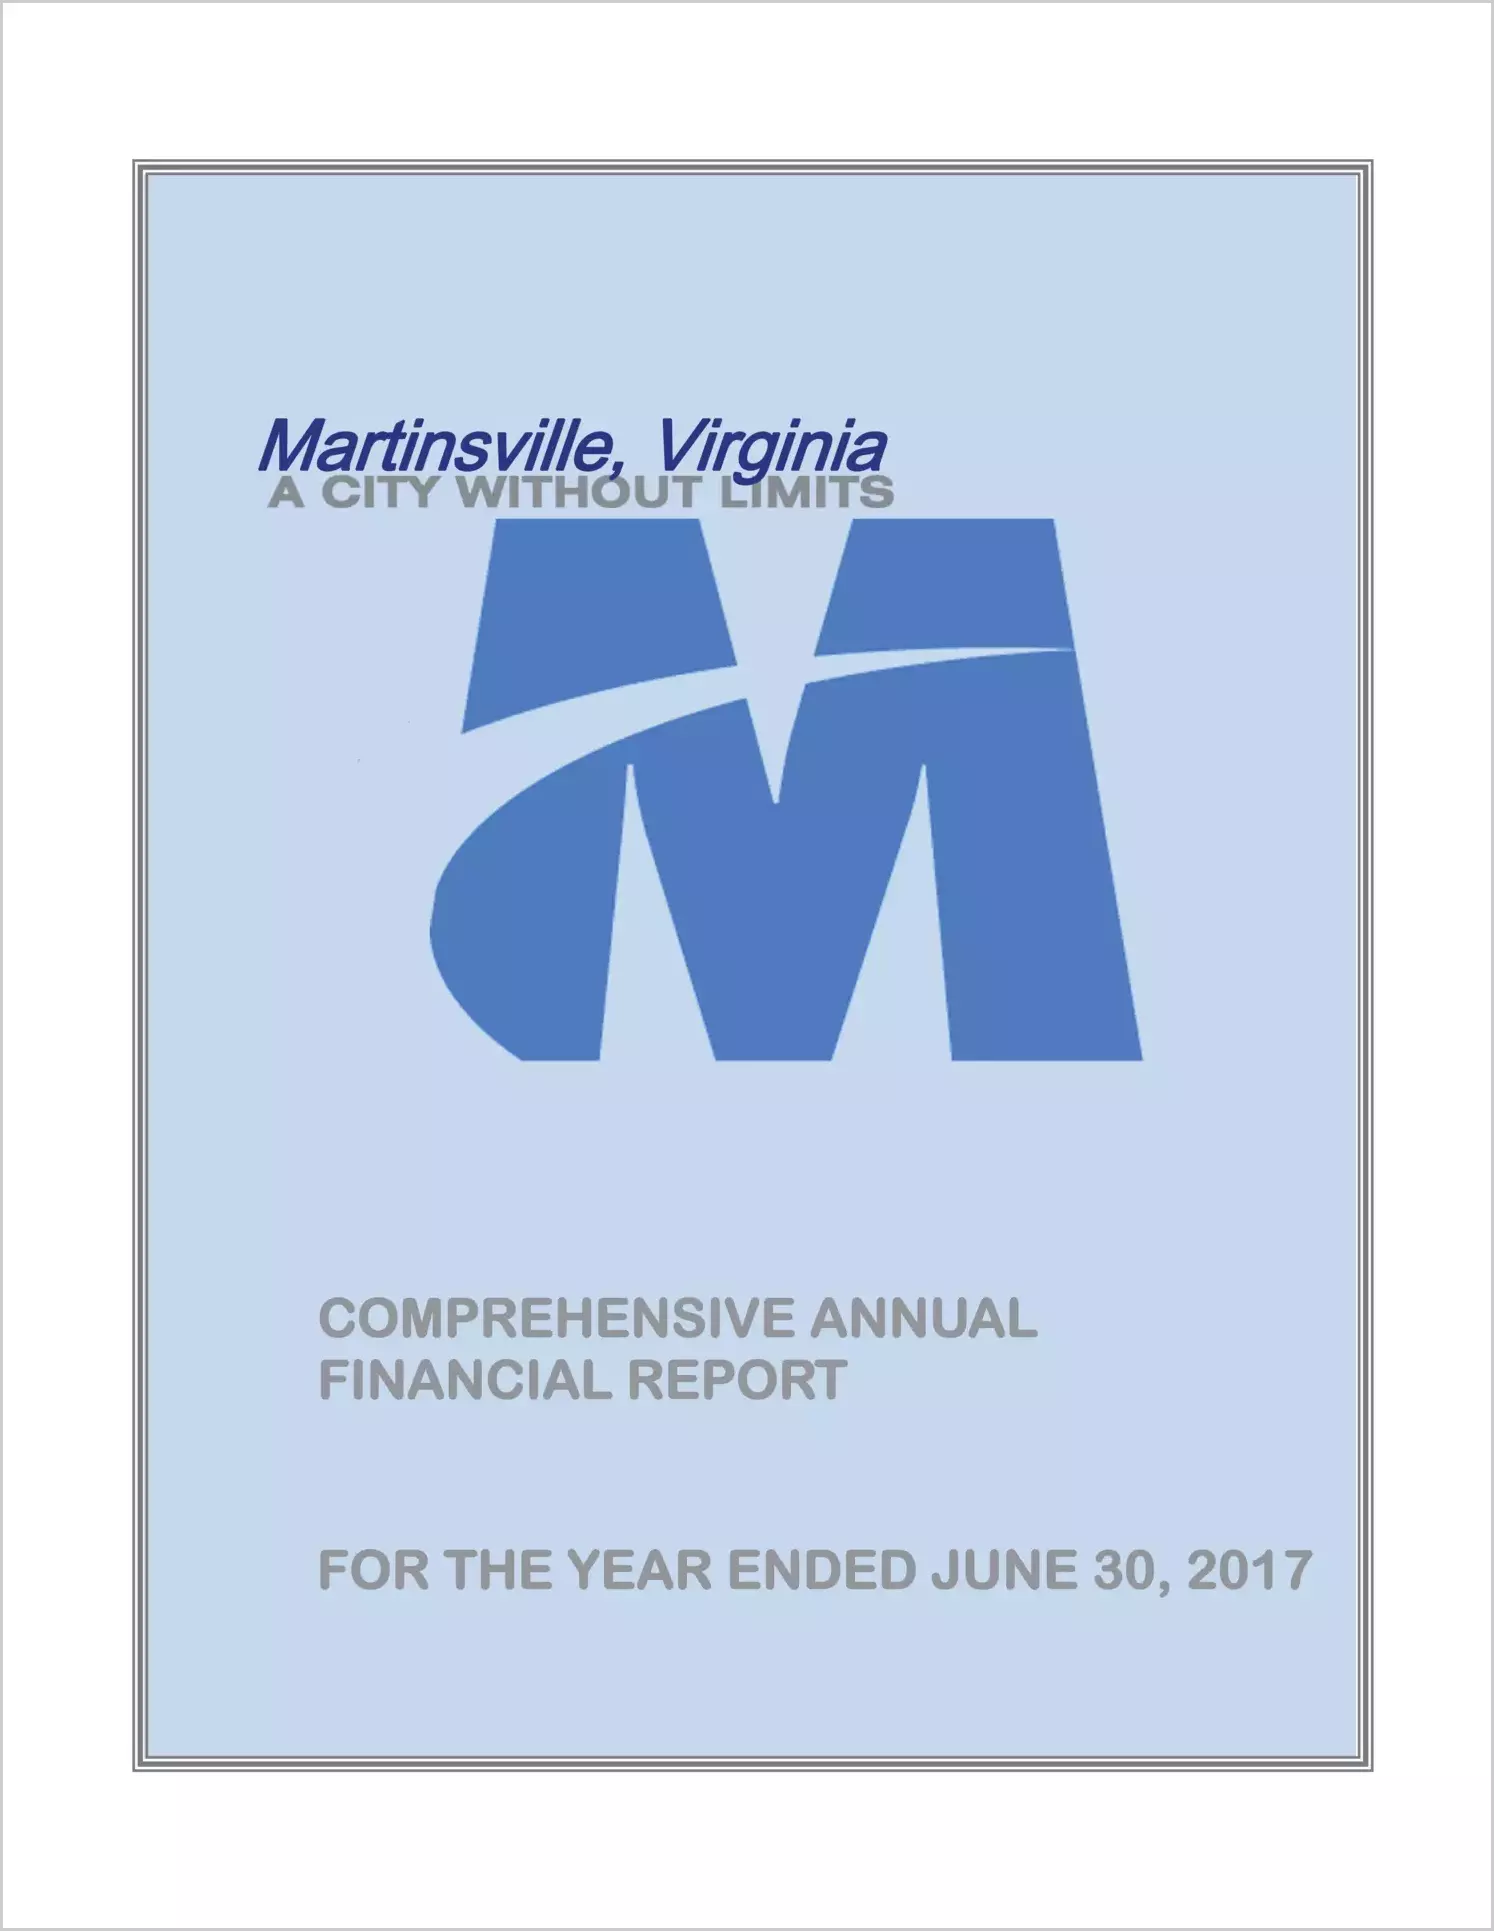 2017 Annual Financial Report for City of Martinsville